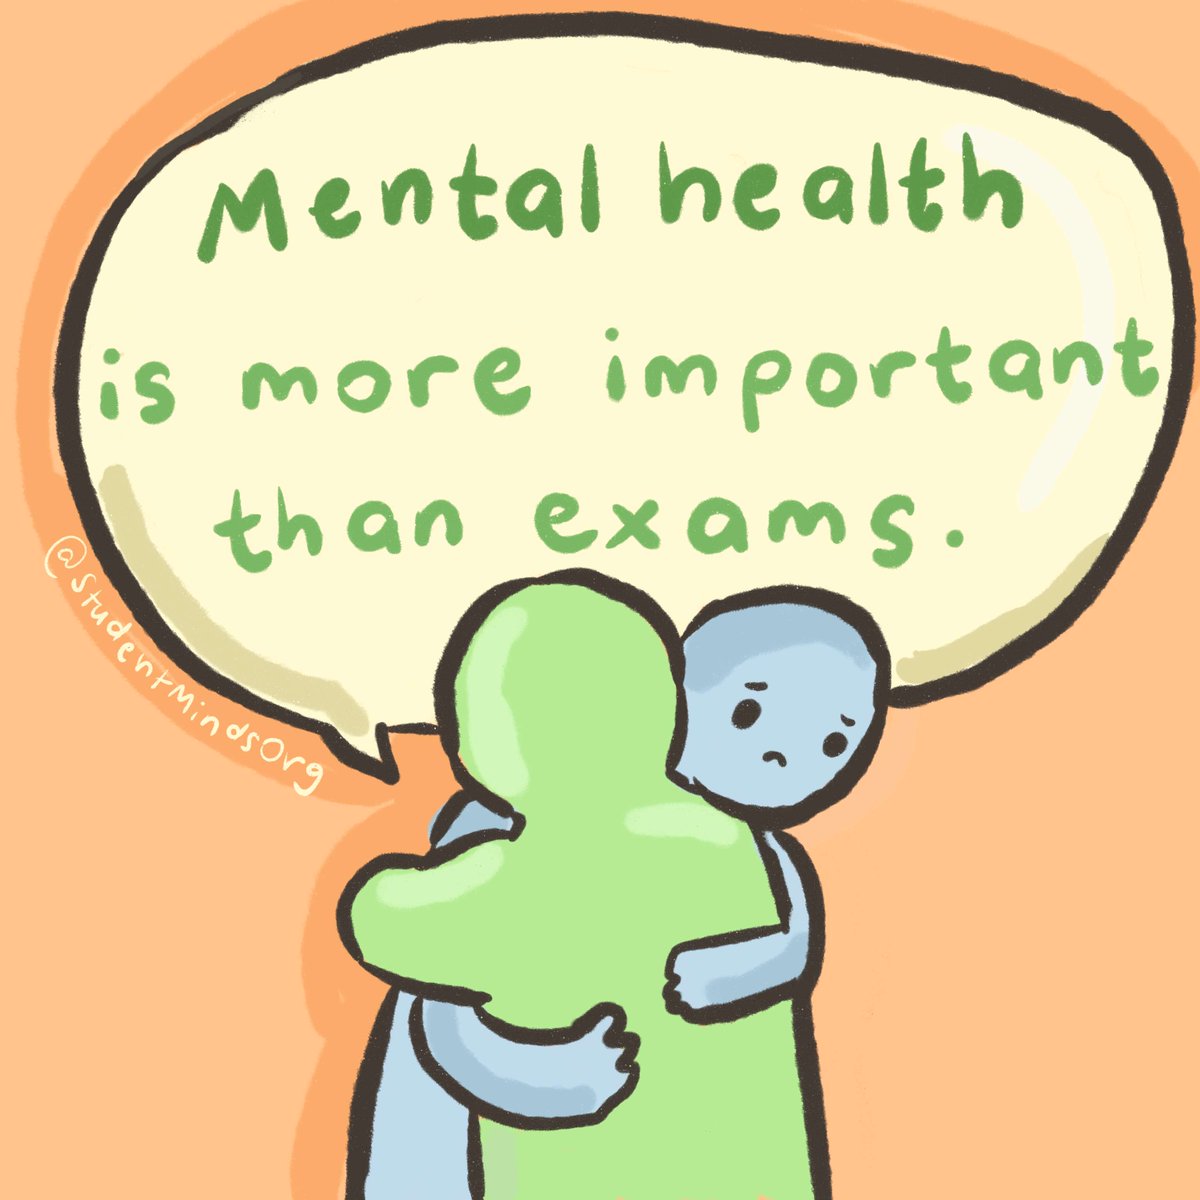 With deadline season upon us again, we want to remind you that your mental health is much more important than deadlines and exams. If you need any extra support from your uni, check out Student Space’s find your uni directory today: studentspace.org.uk/find-support